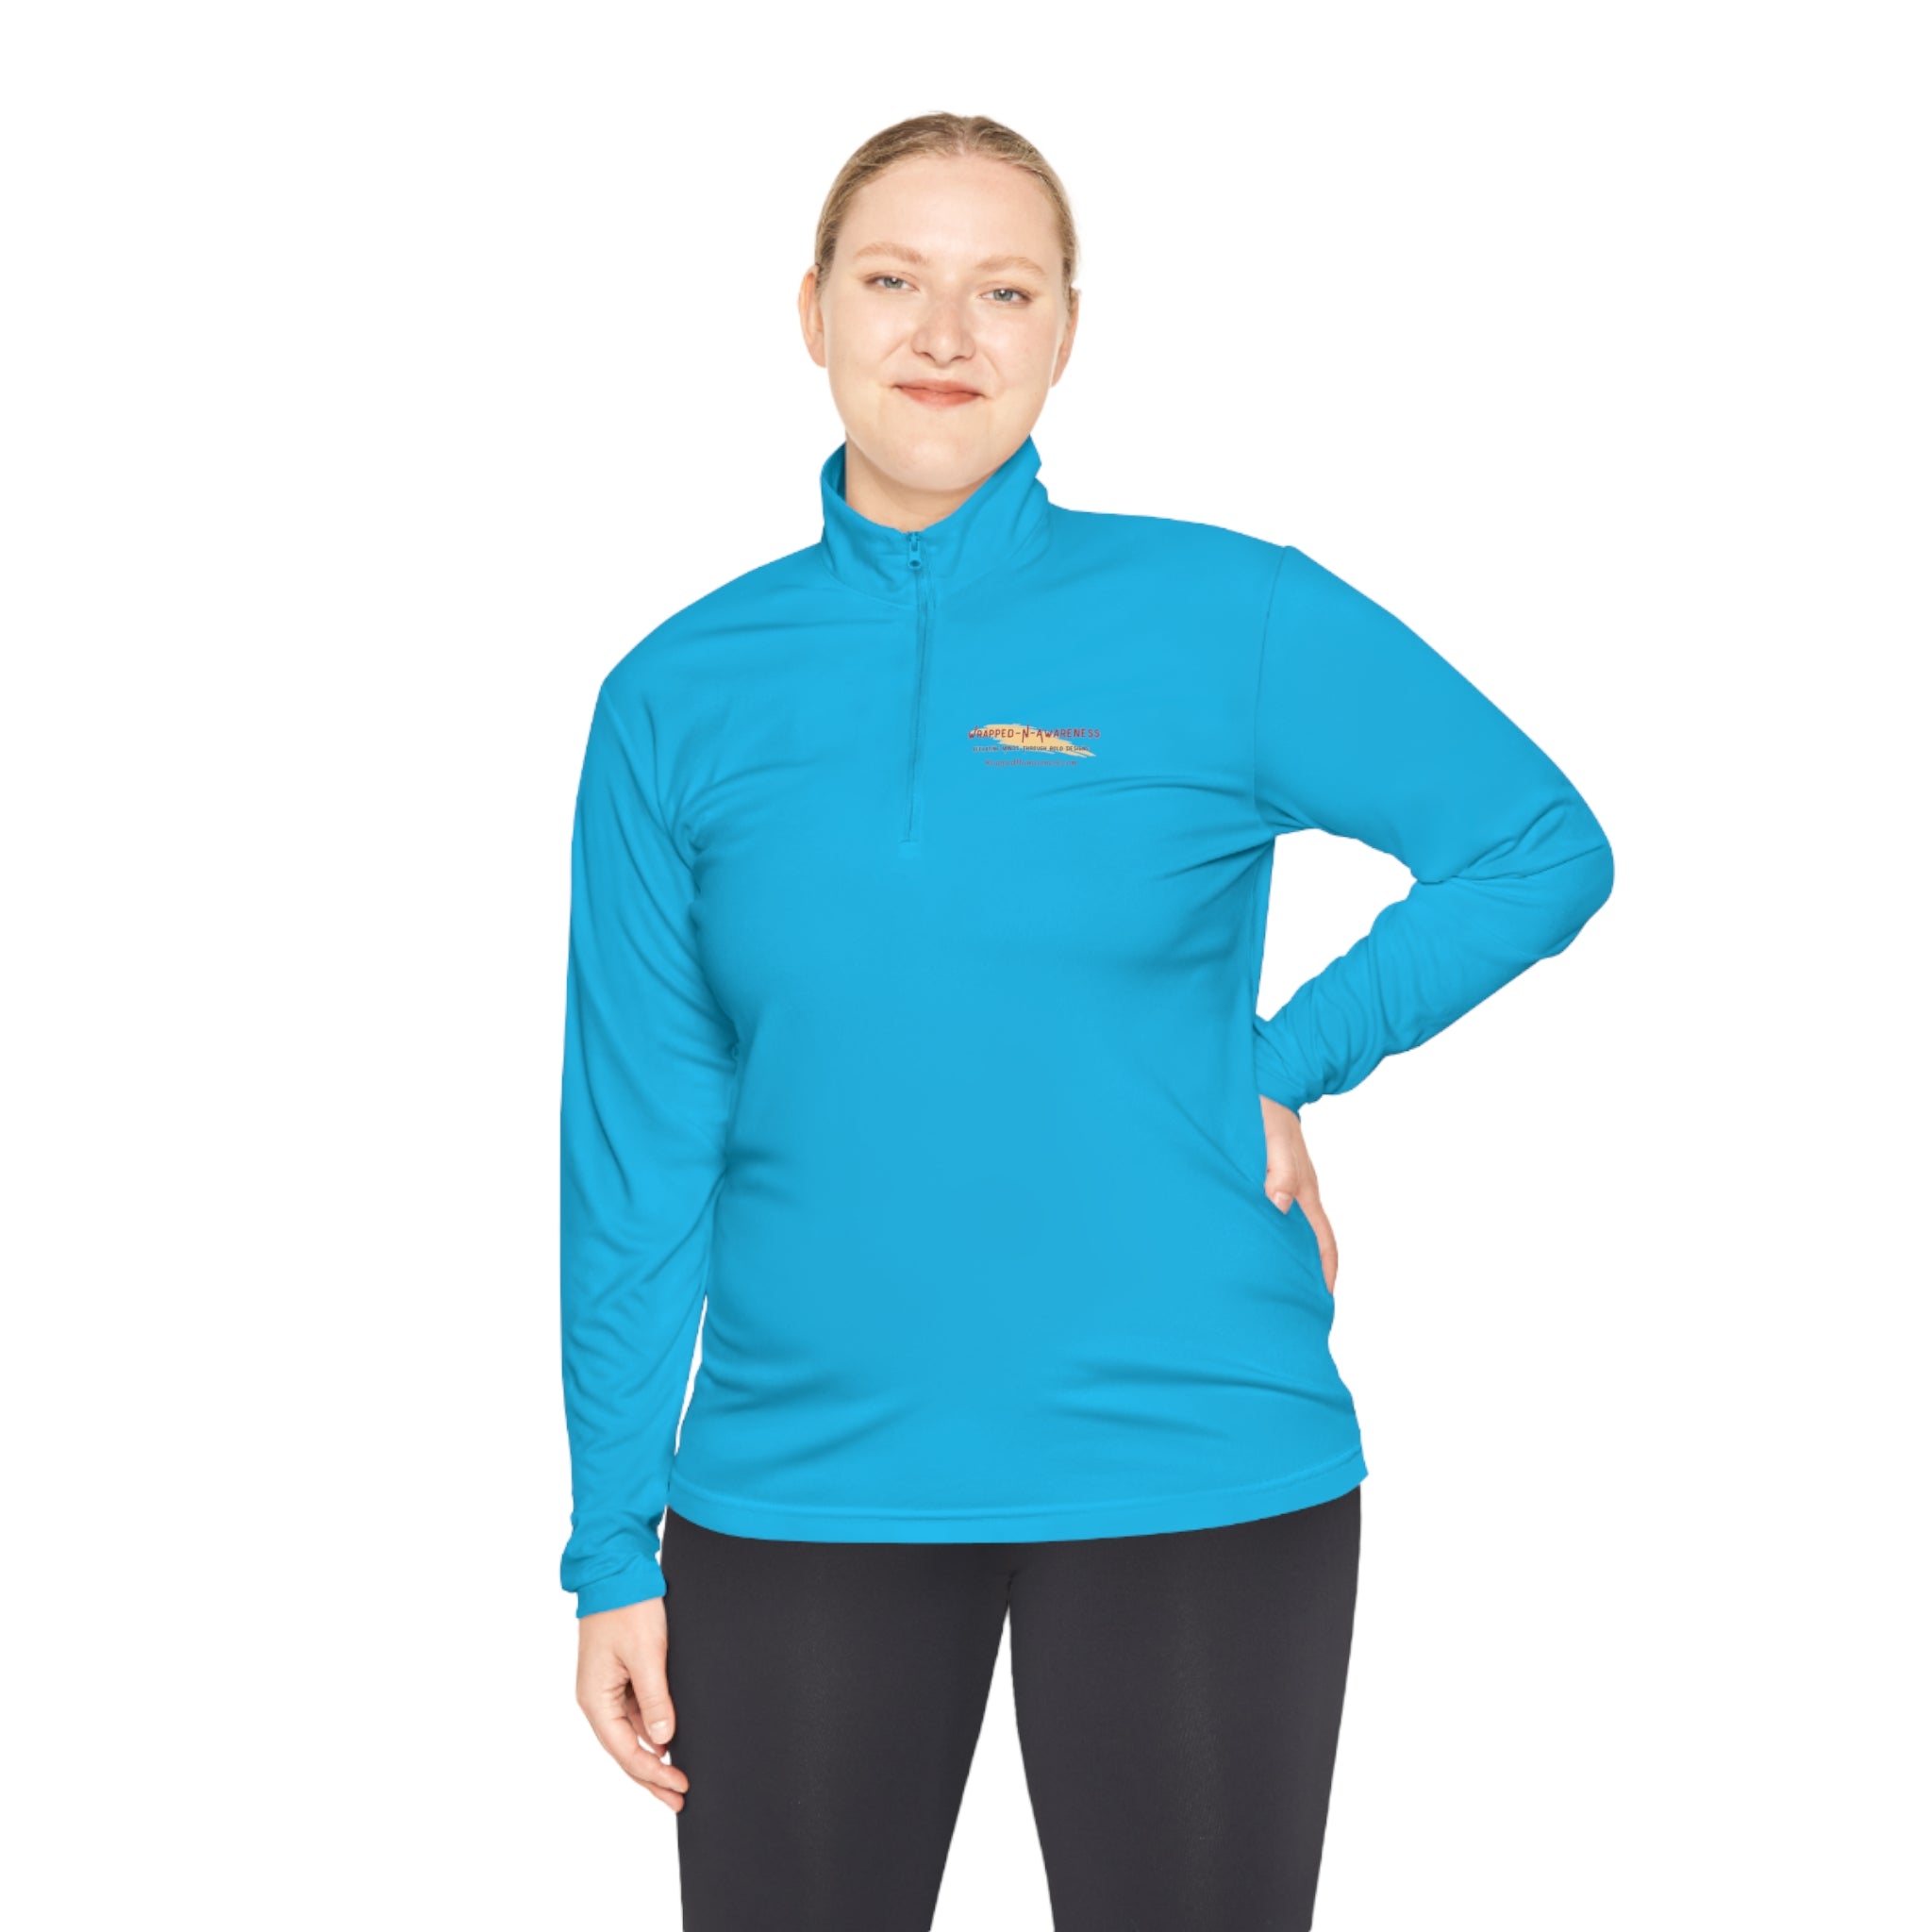 Strong Q-Zip Positivity Pullover Atomic Blue Casual Pullover Cozy Pullover Graphic Pullover Layering Piece Lightweight Pullover Men's Pullover Pullover Stylish Pullover Trendy Pullover Women's Pullover Long-sleeve 17379662296062407521_2048 Printify